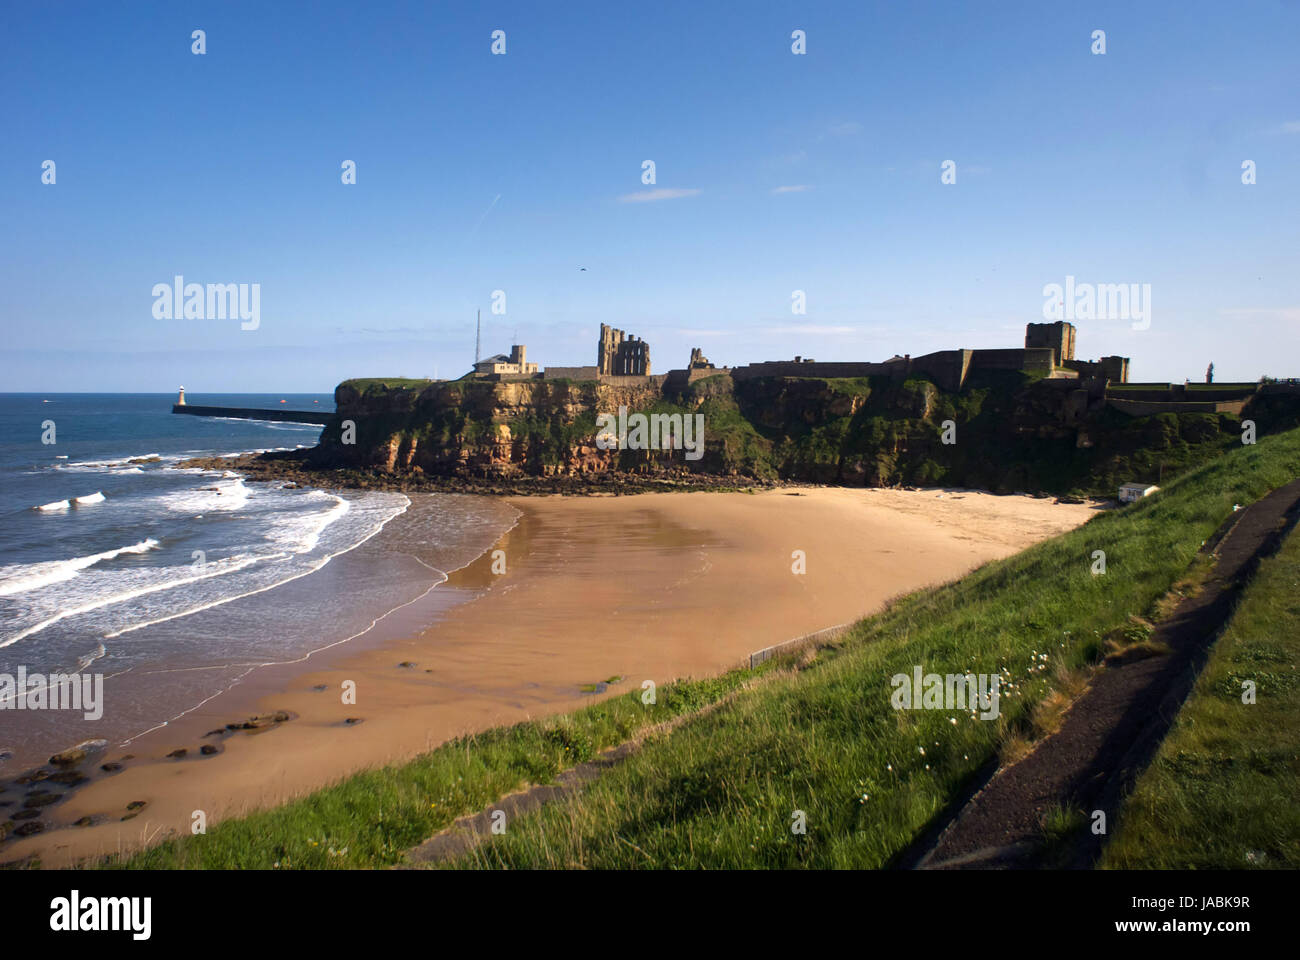 King Edwards Bay and Tynemouth Priory, Tynemouth, North East England Stock Photo